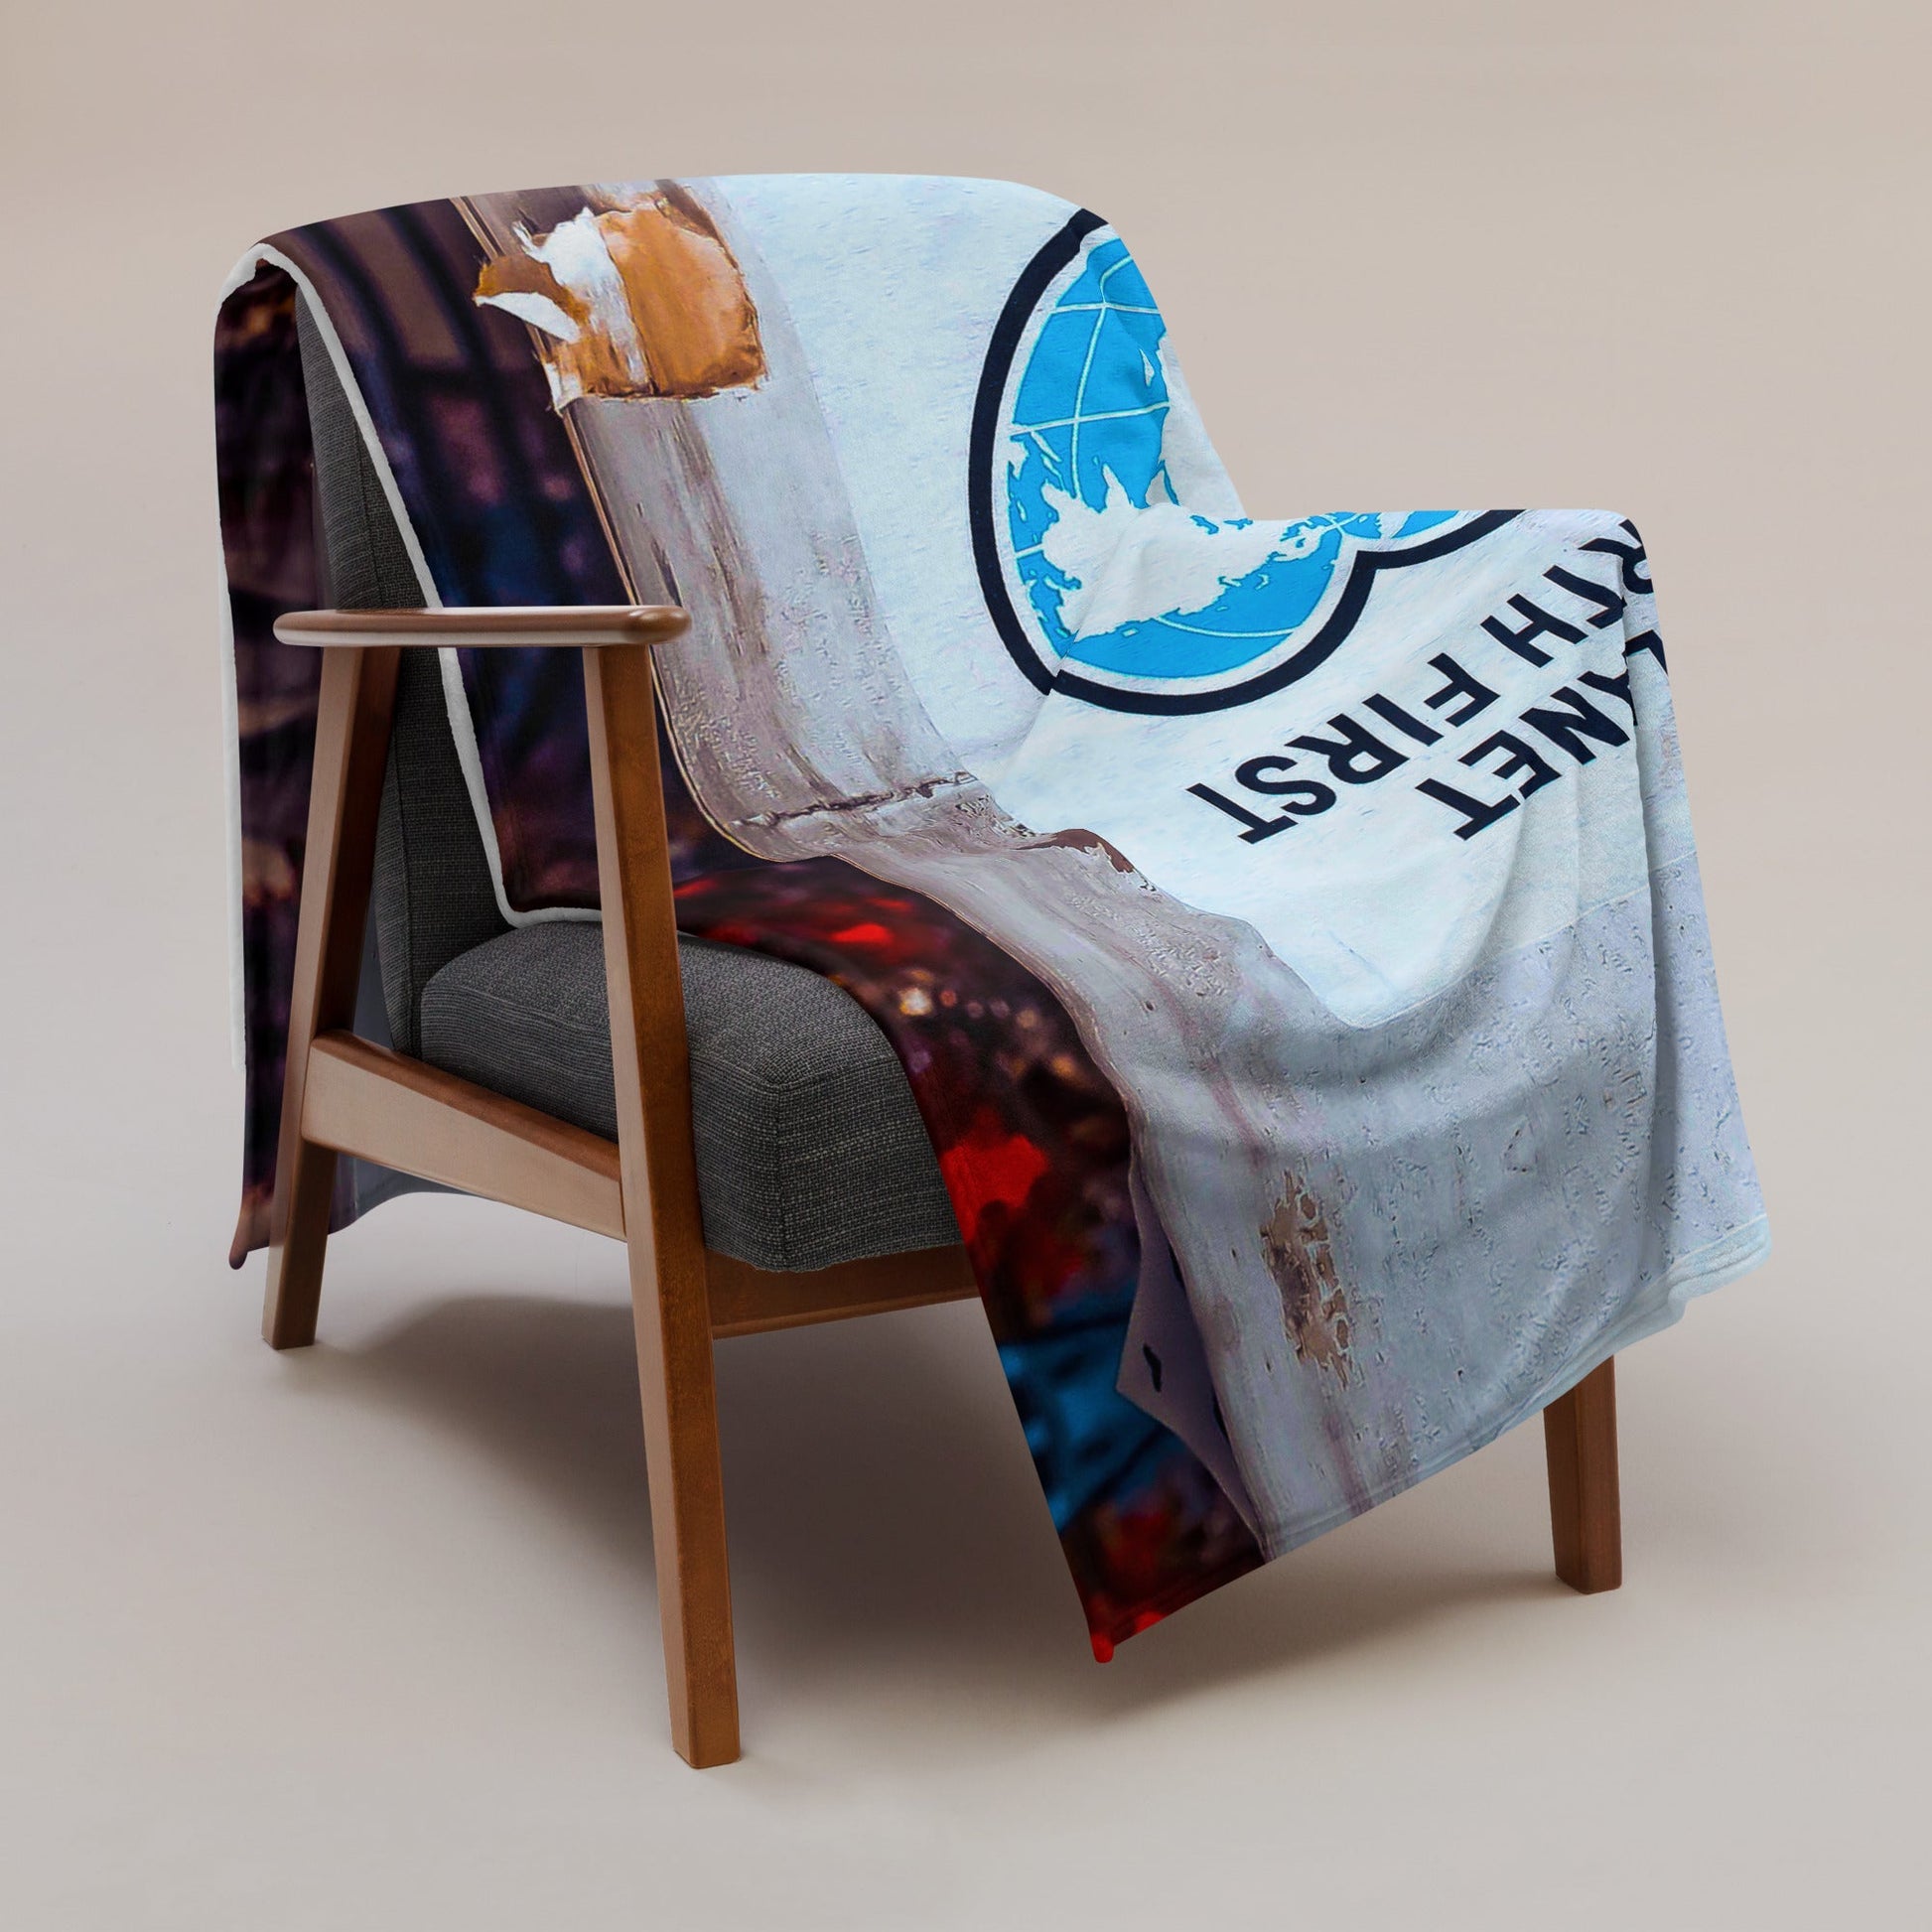 Planet Earth First Throw Blanket - The Grateful Hearts